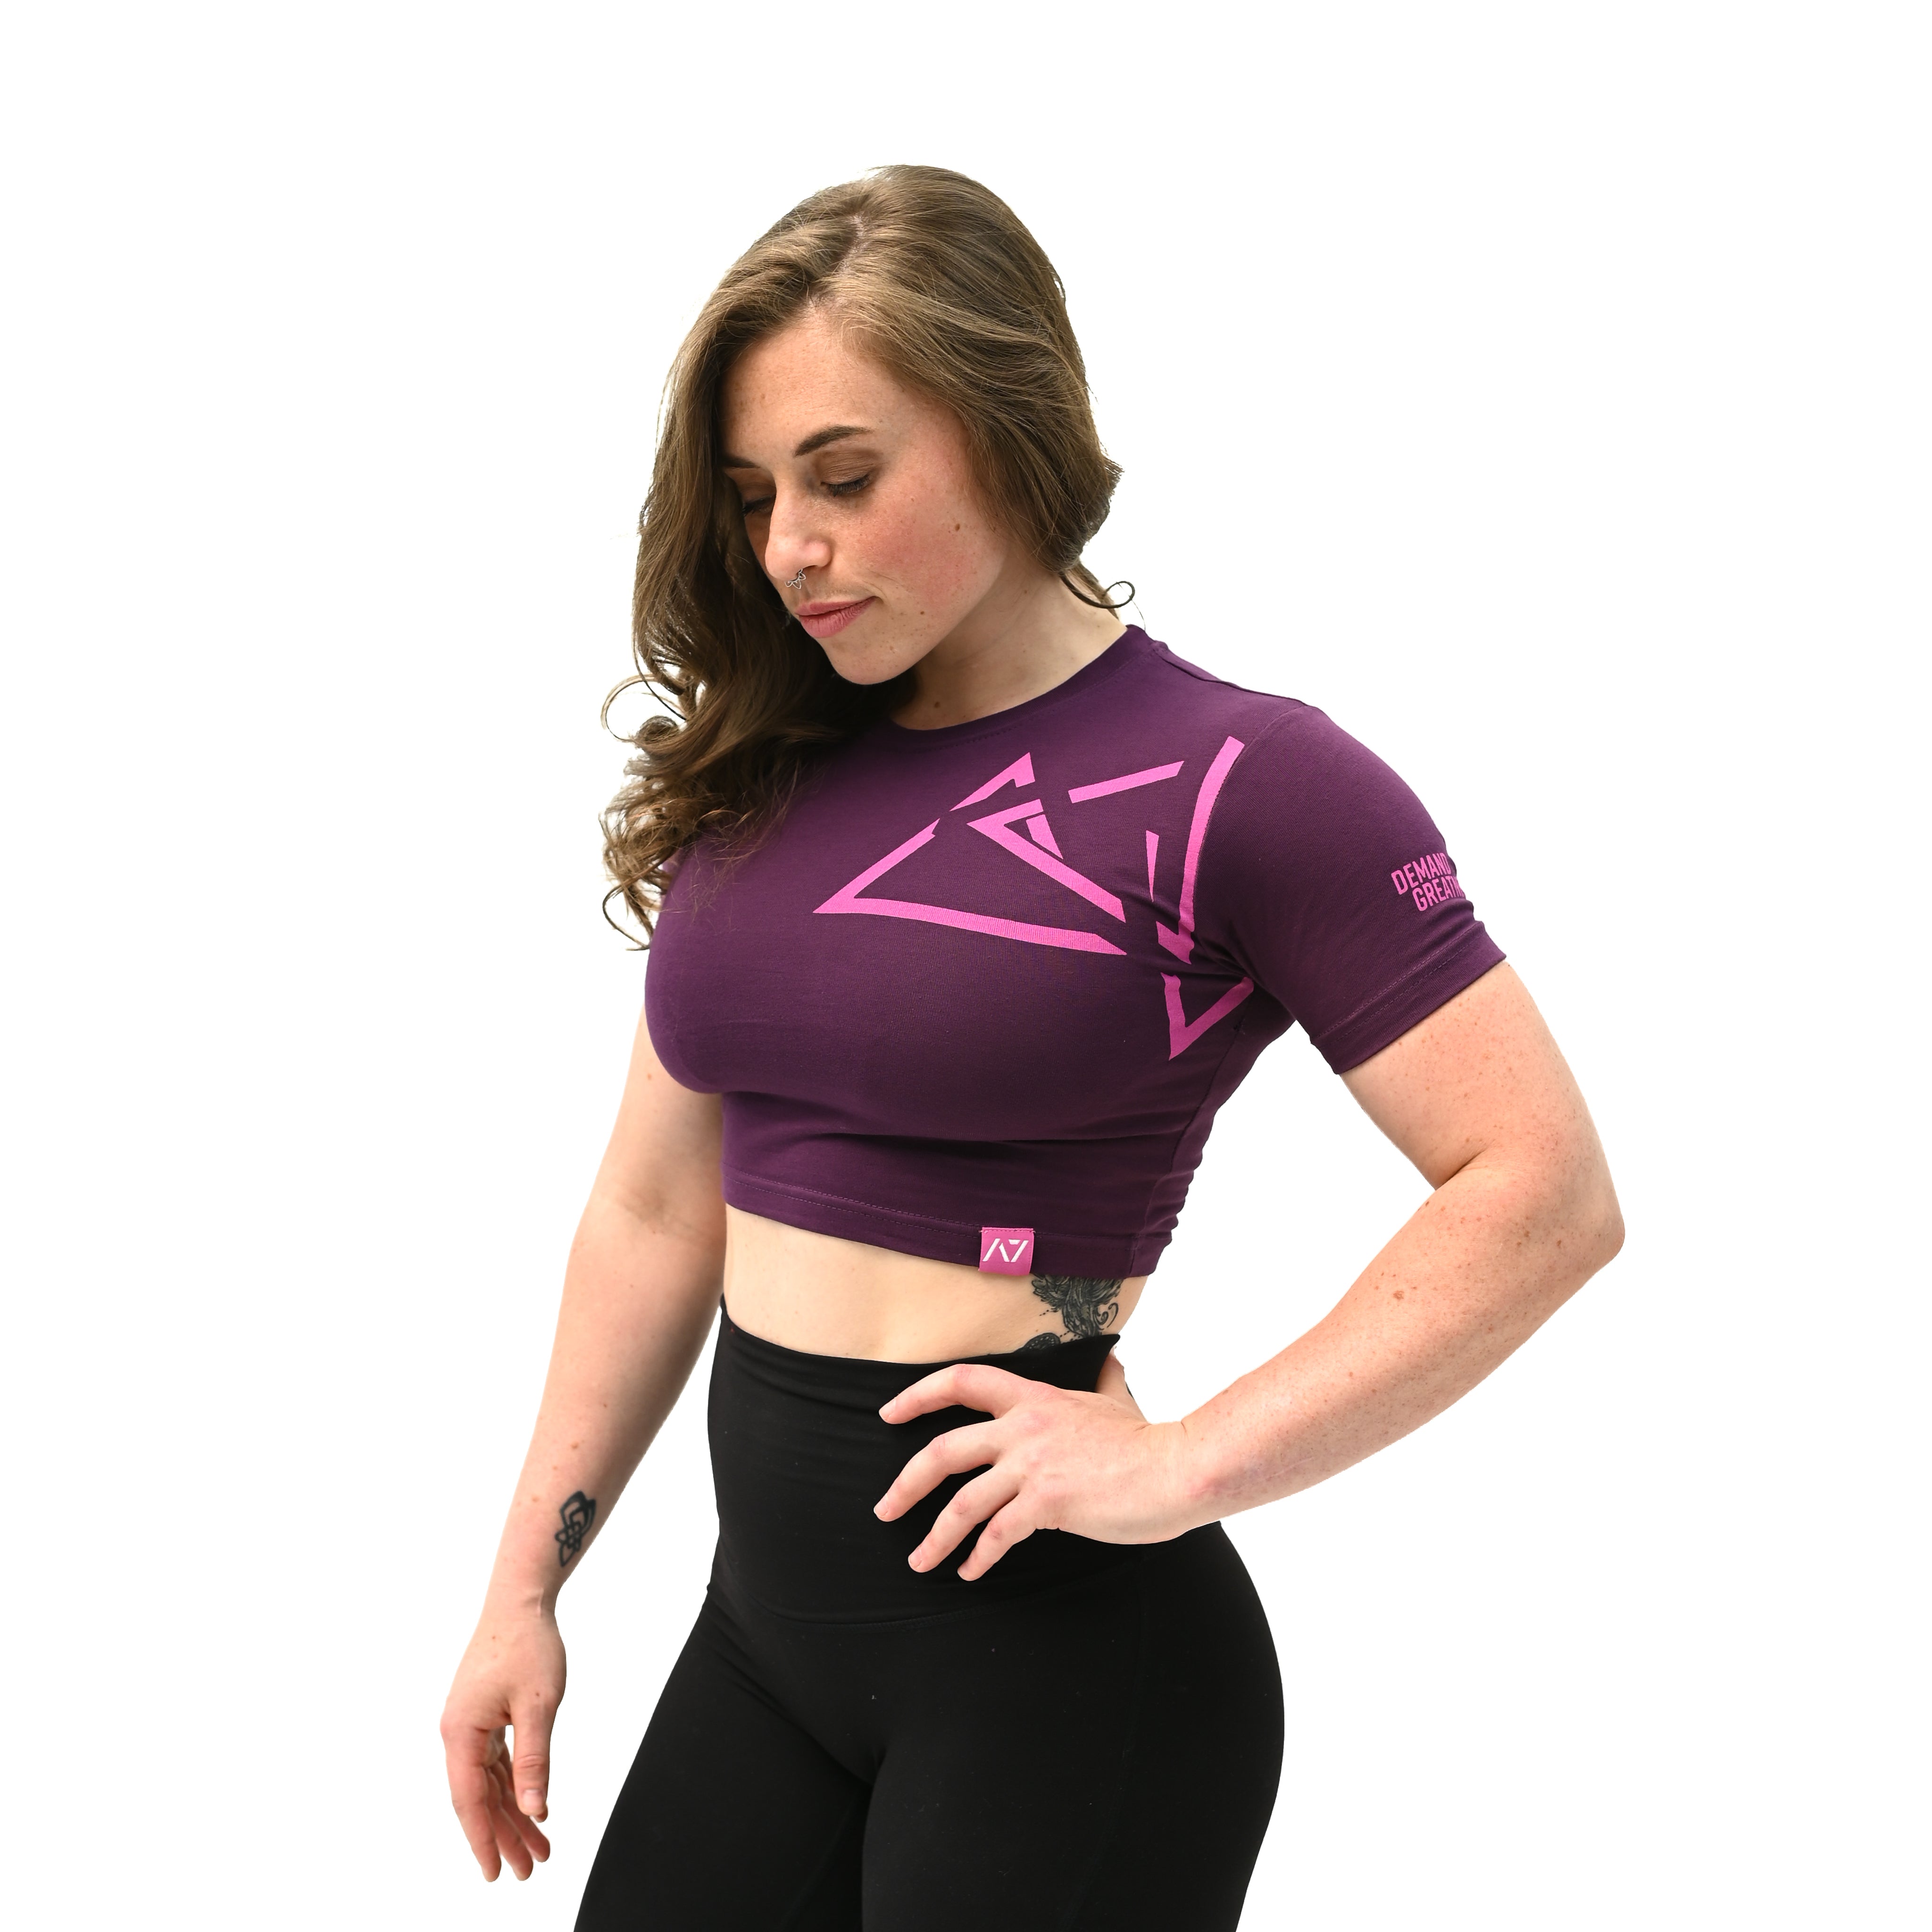 Delta Link Crop Non Bar Grip T-Shirt is perfect for in and out of the gym. Purchase Delta Link Crop Non Bar Grip tshirt UK from A7 UK. Purchase Delta Link Crop Shirt Europe from A7 UK. Best gymwear shipping to UK and Europe from A7 UK. Delta Link Crop is our newest Non Bar Grip Design. The best Powerlifting apparel for all your workouts. Available in UK and Europe including France, Italy, Germany, Sweden and Poland.